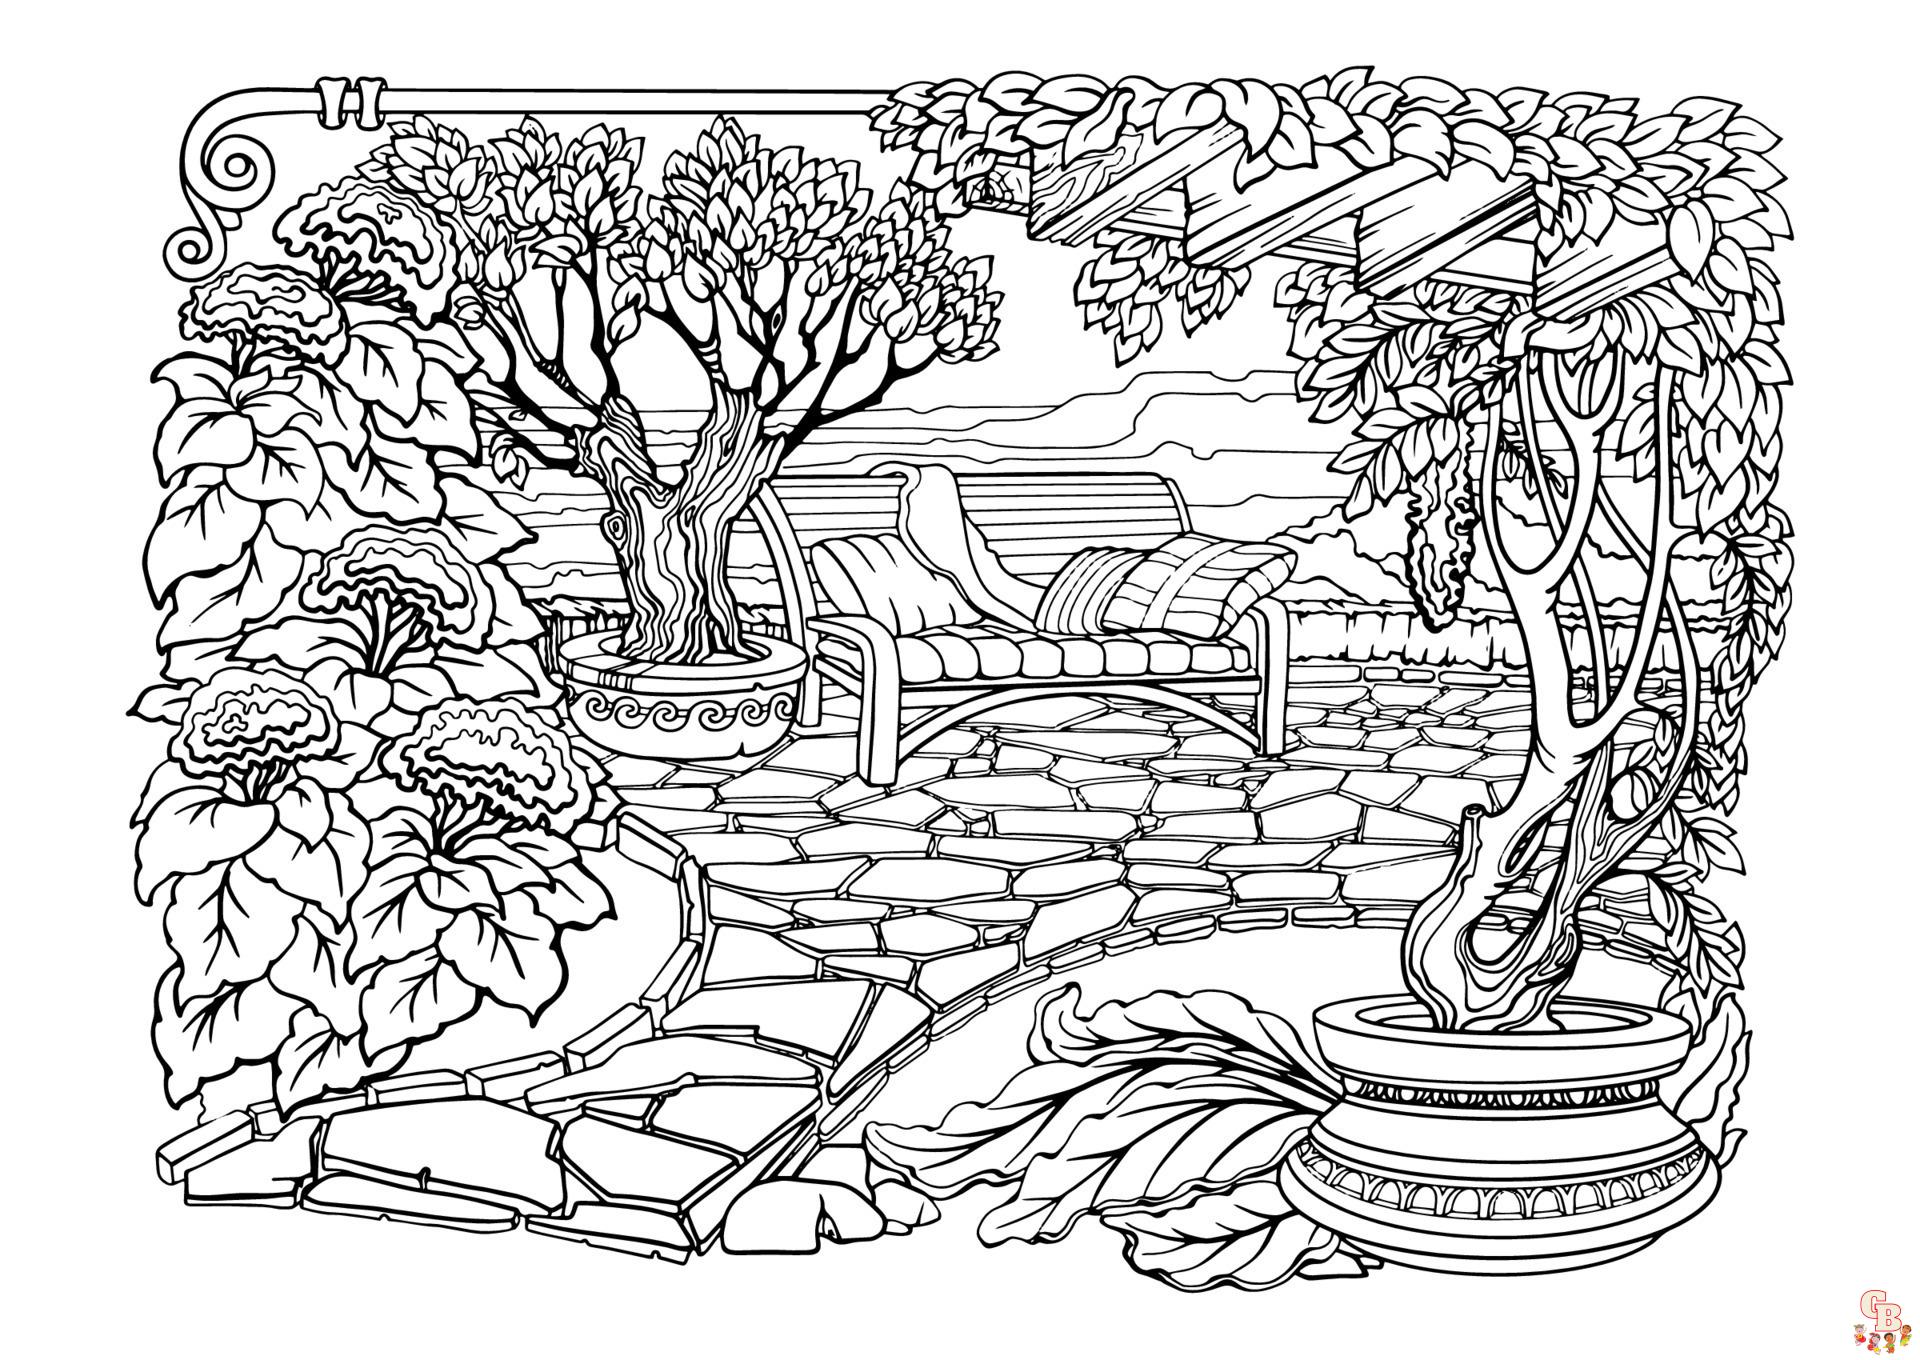 http://gbcoloring.com/wp-content/uploads/2023/02/garden-coloring-pages-54.jpg